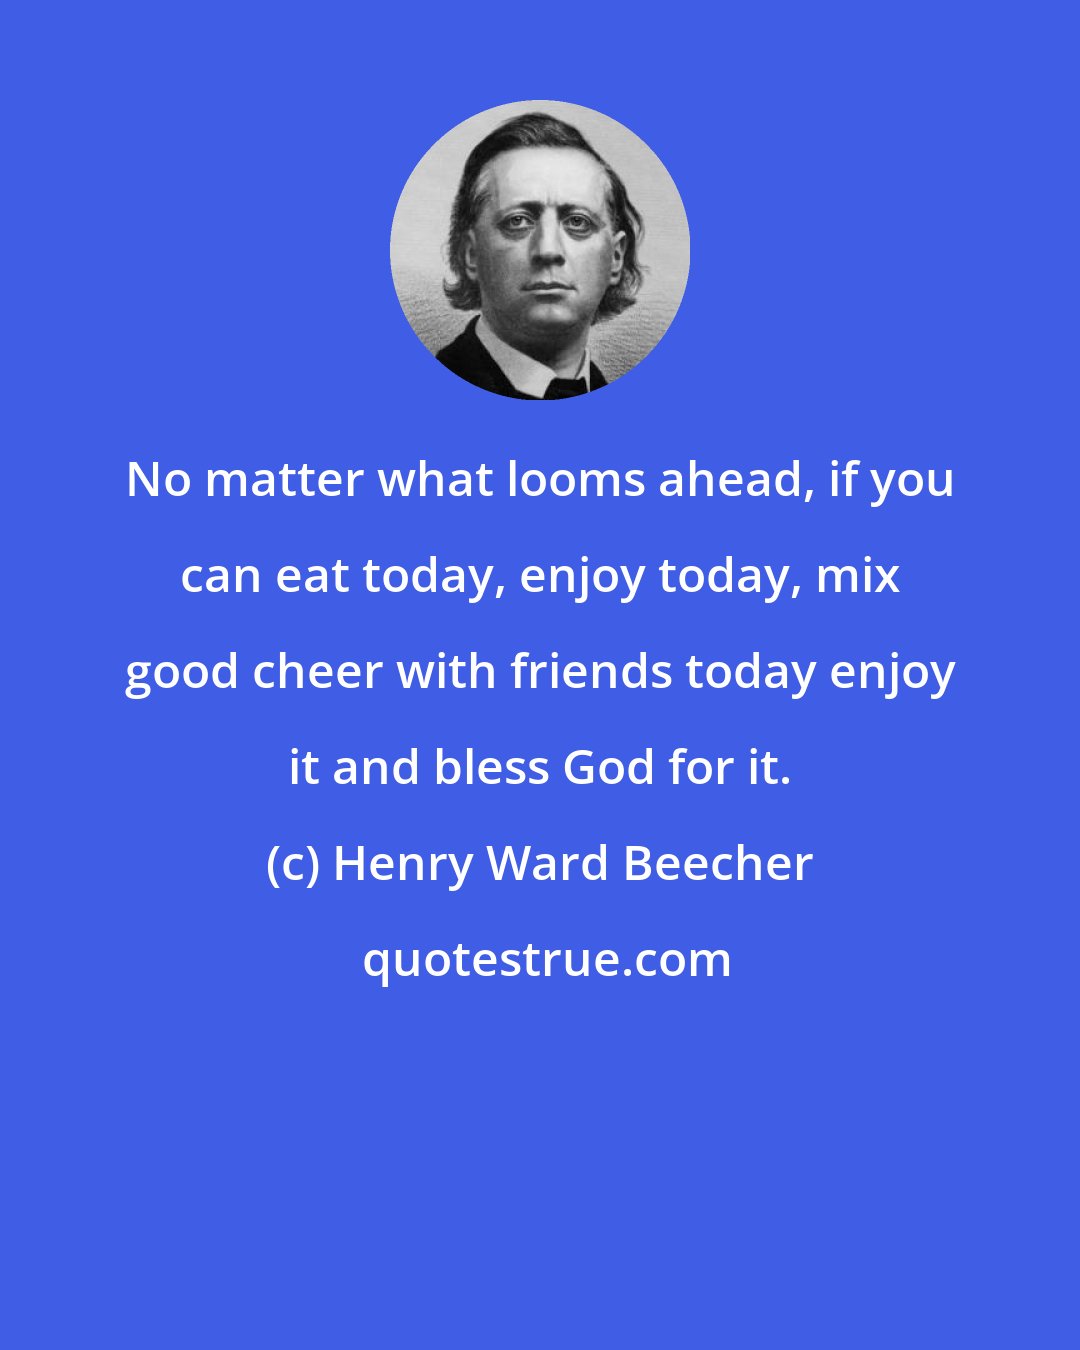 Henry Ward Beecher: No matter what looms ahead, if you can eat today, enjoy today, mix good cheer with friends today enjoy it and bless God for it.